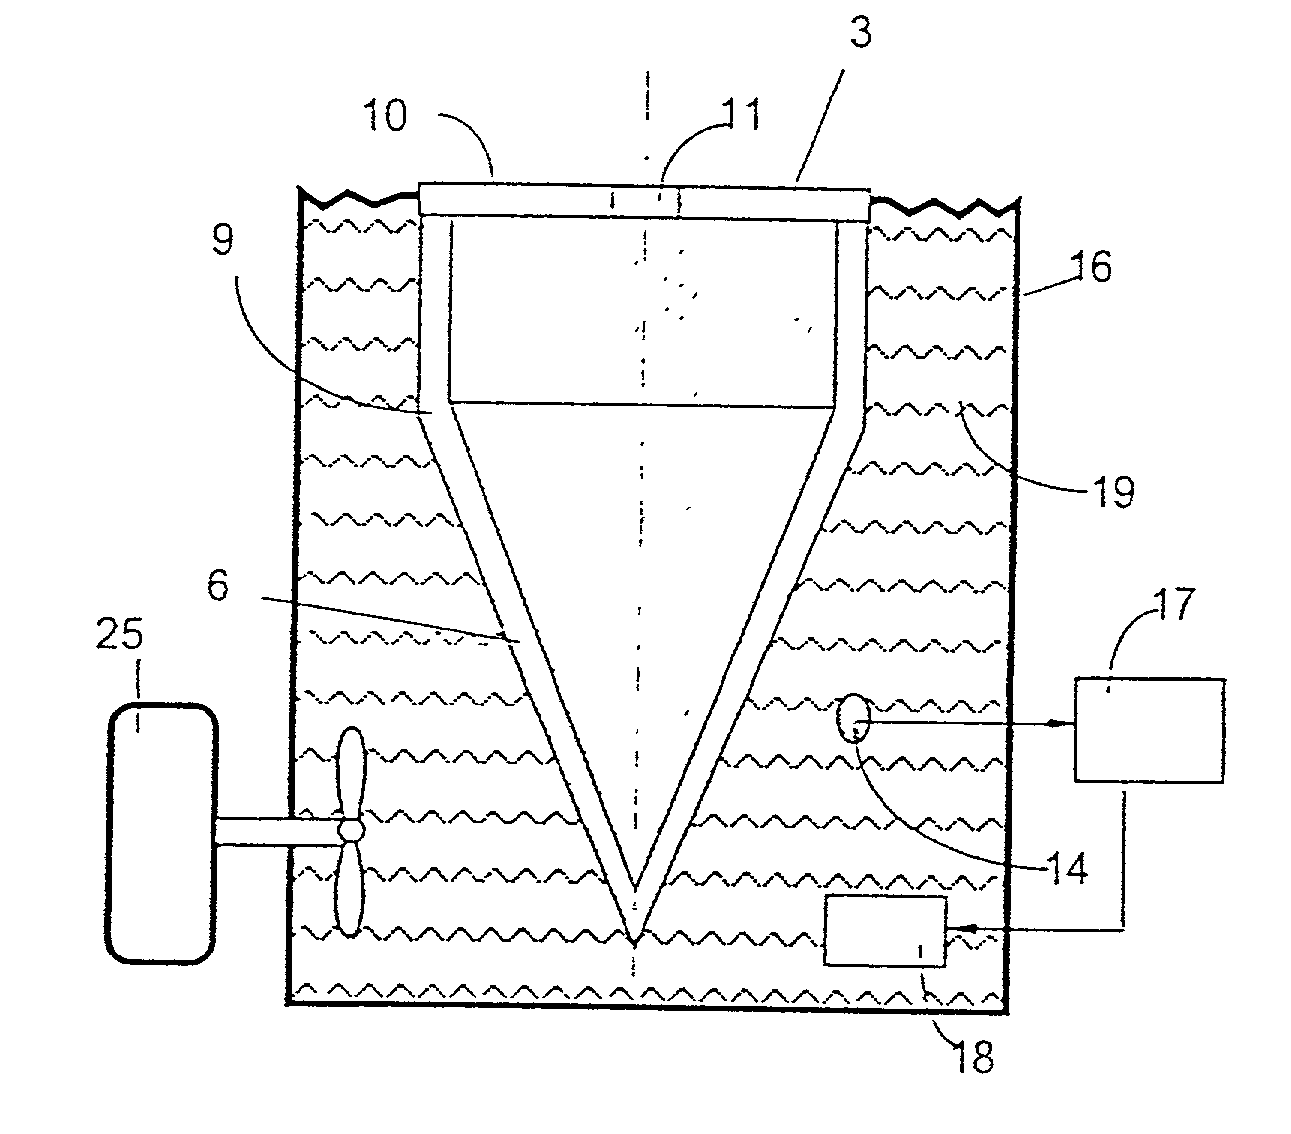 Blackbody cavity for calibration of infrared thermometers